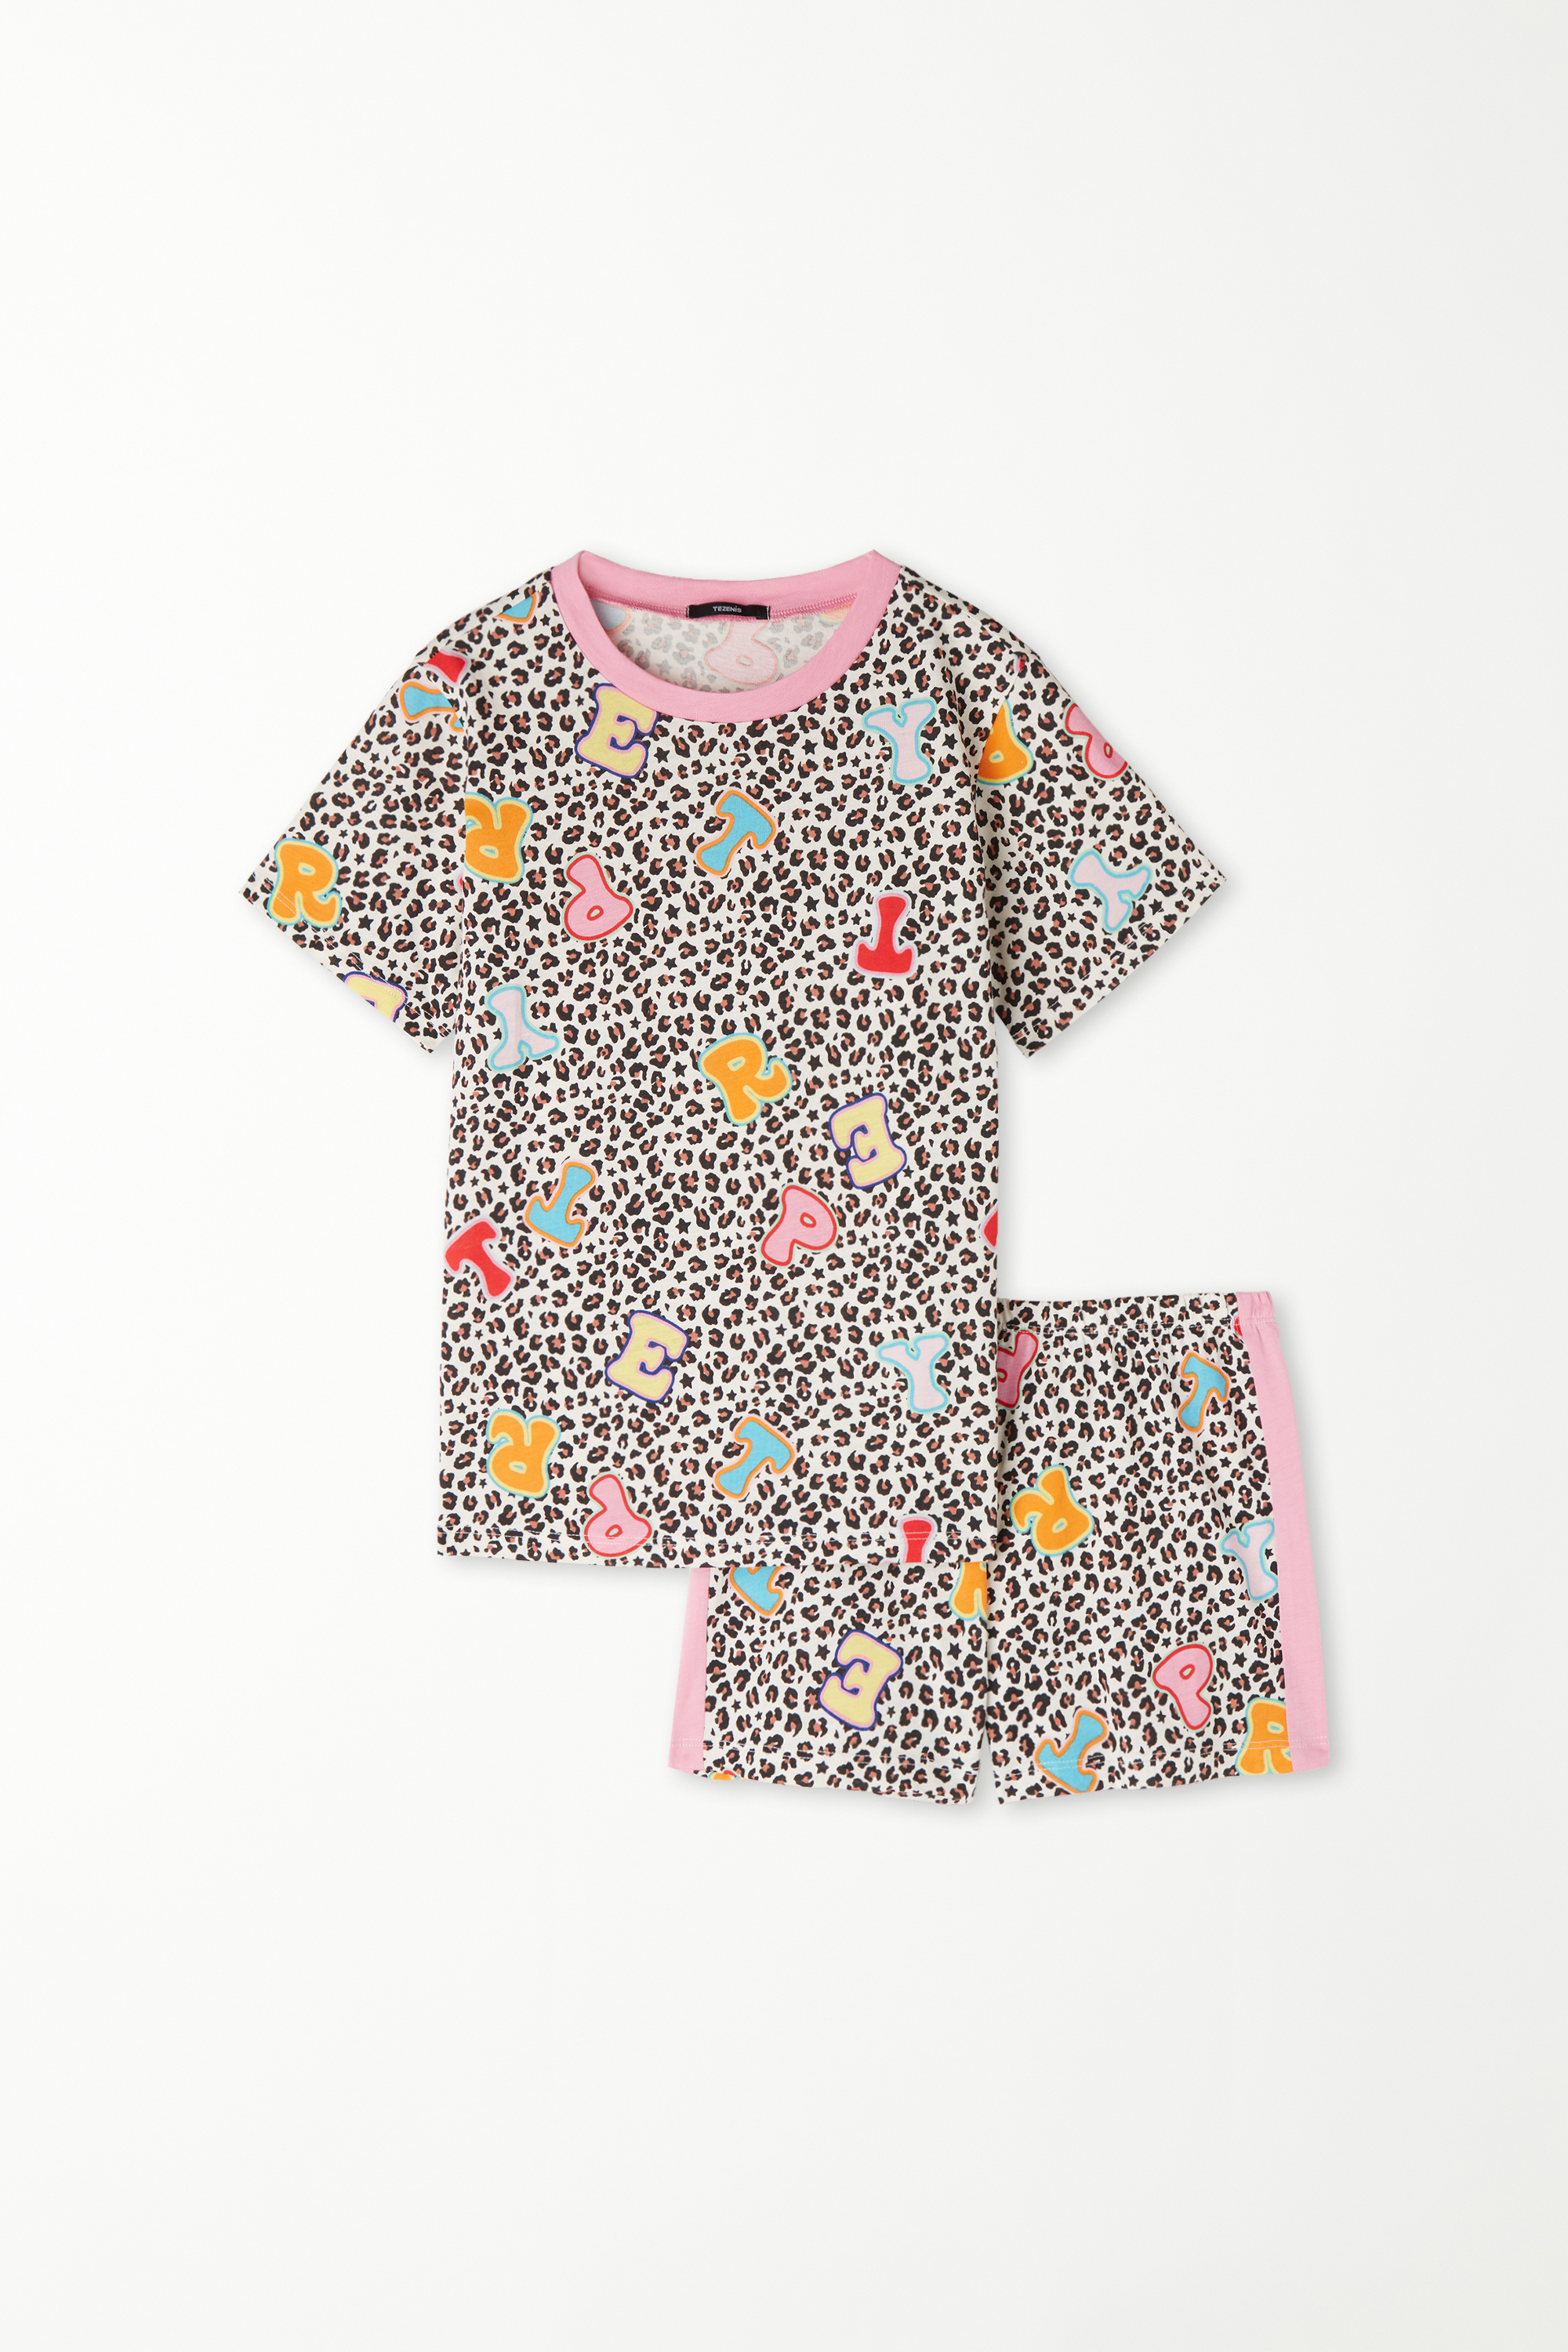 Girls’ Short Sleeve Short Cotton Pyjamas with Animal Print and Letters